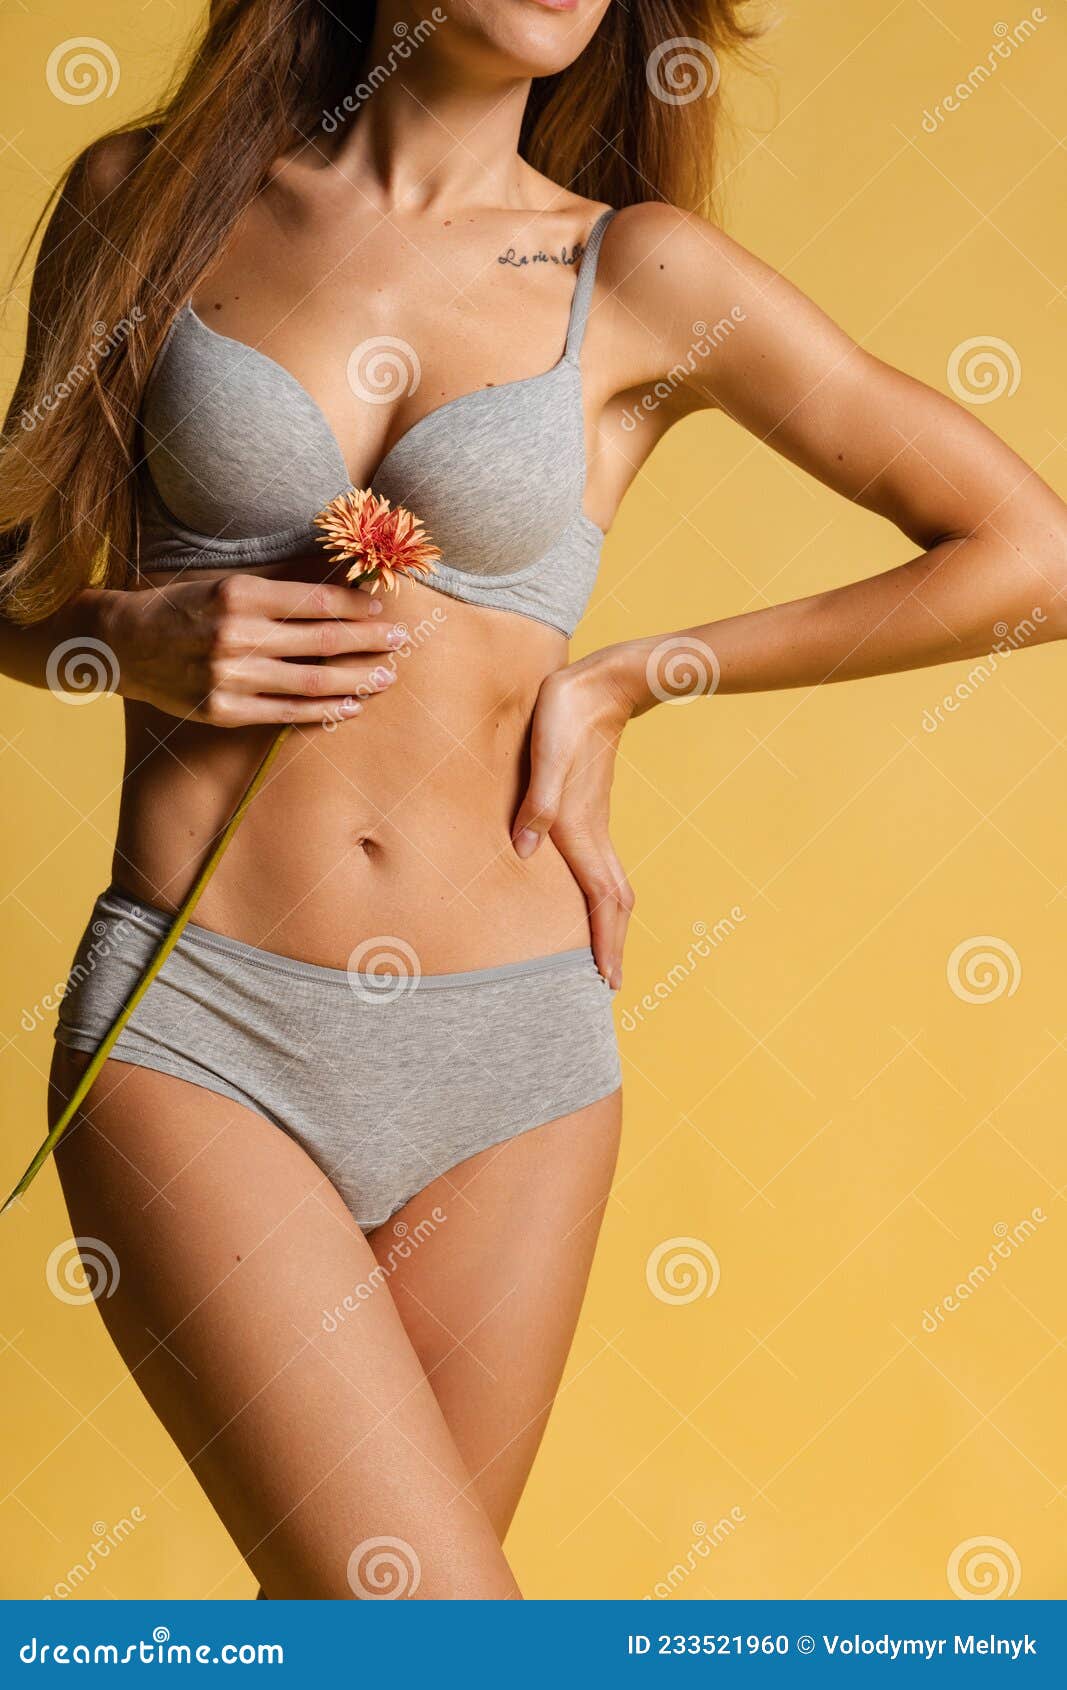 Happy Young Adorable Slim Woman in Underwear Isolated Over Gray